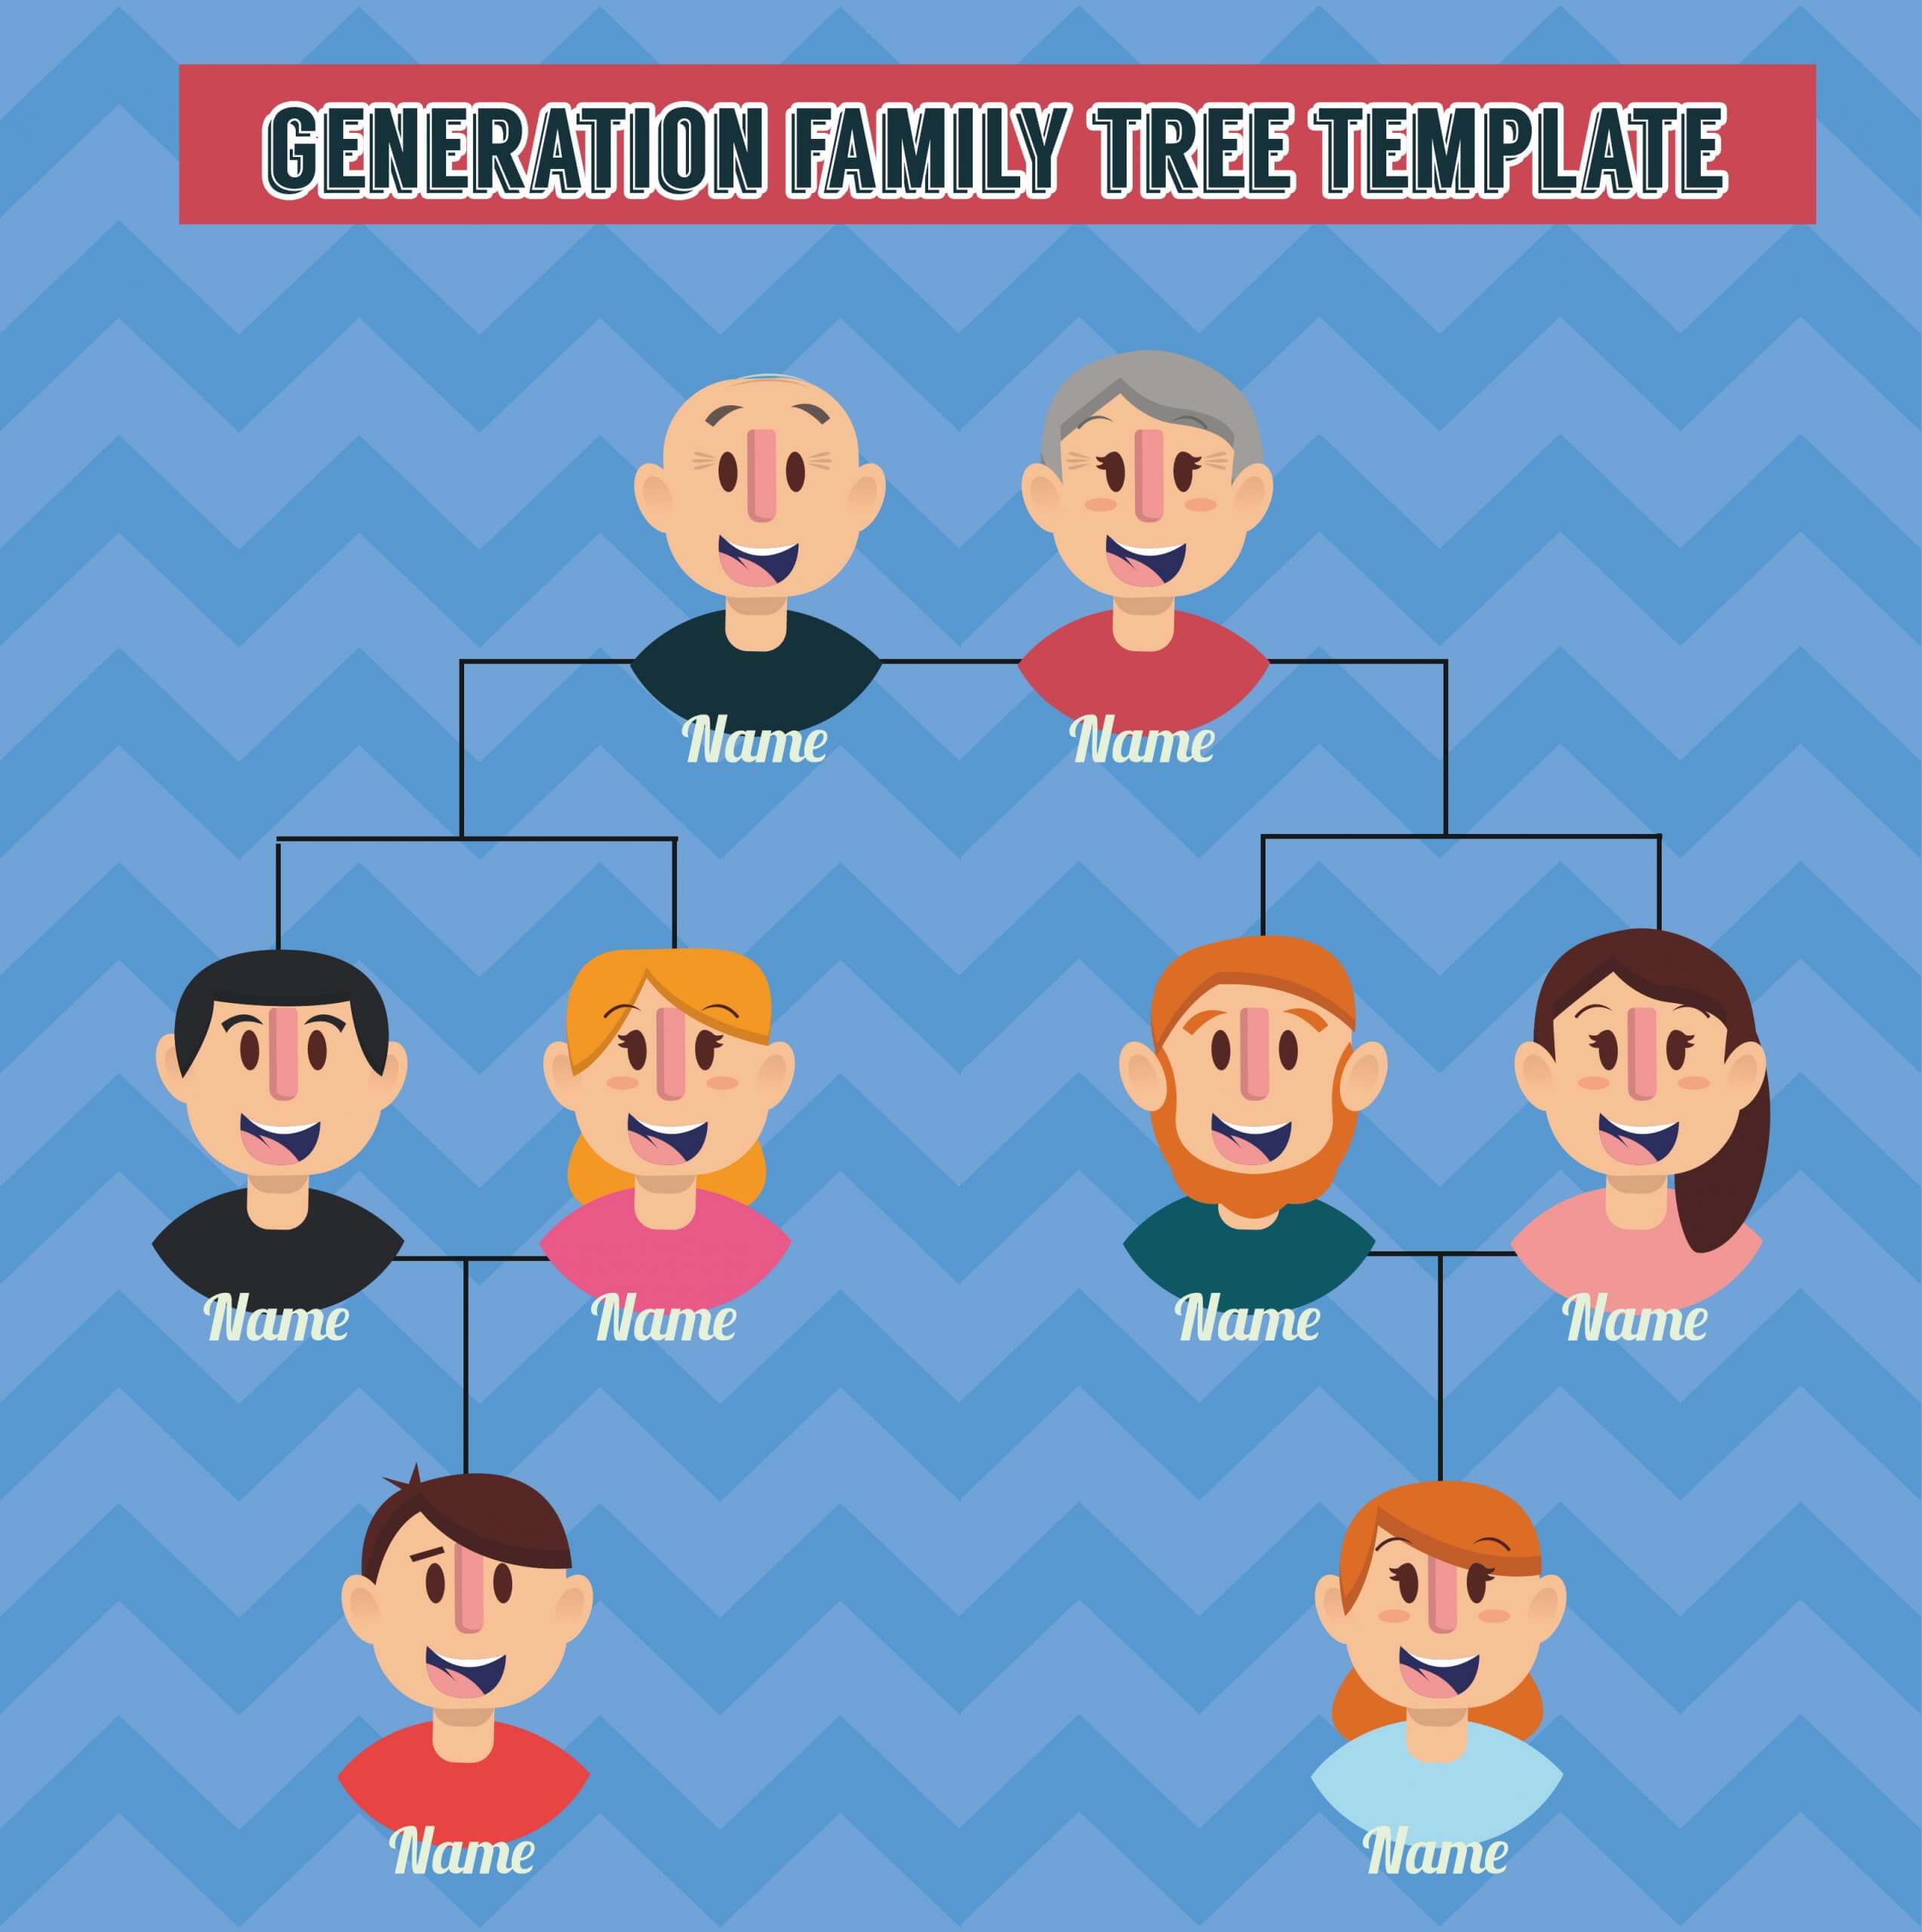 generation family tree template Free PSD file photoshop 1